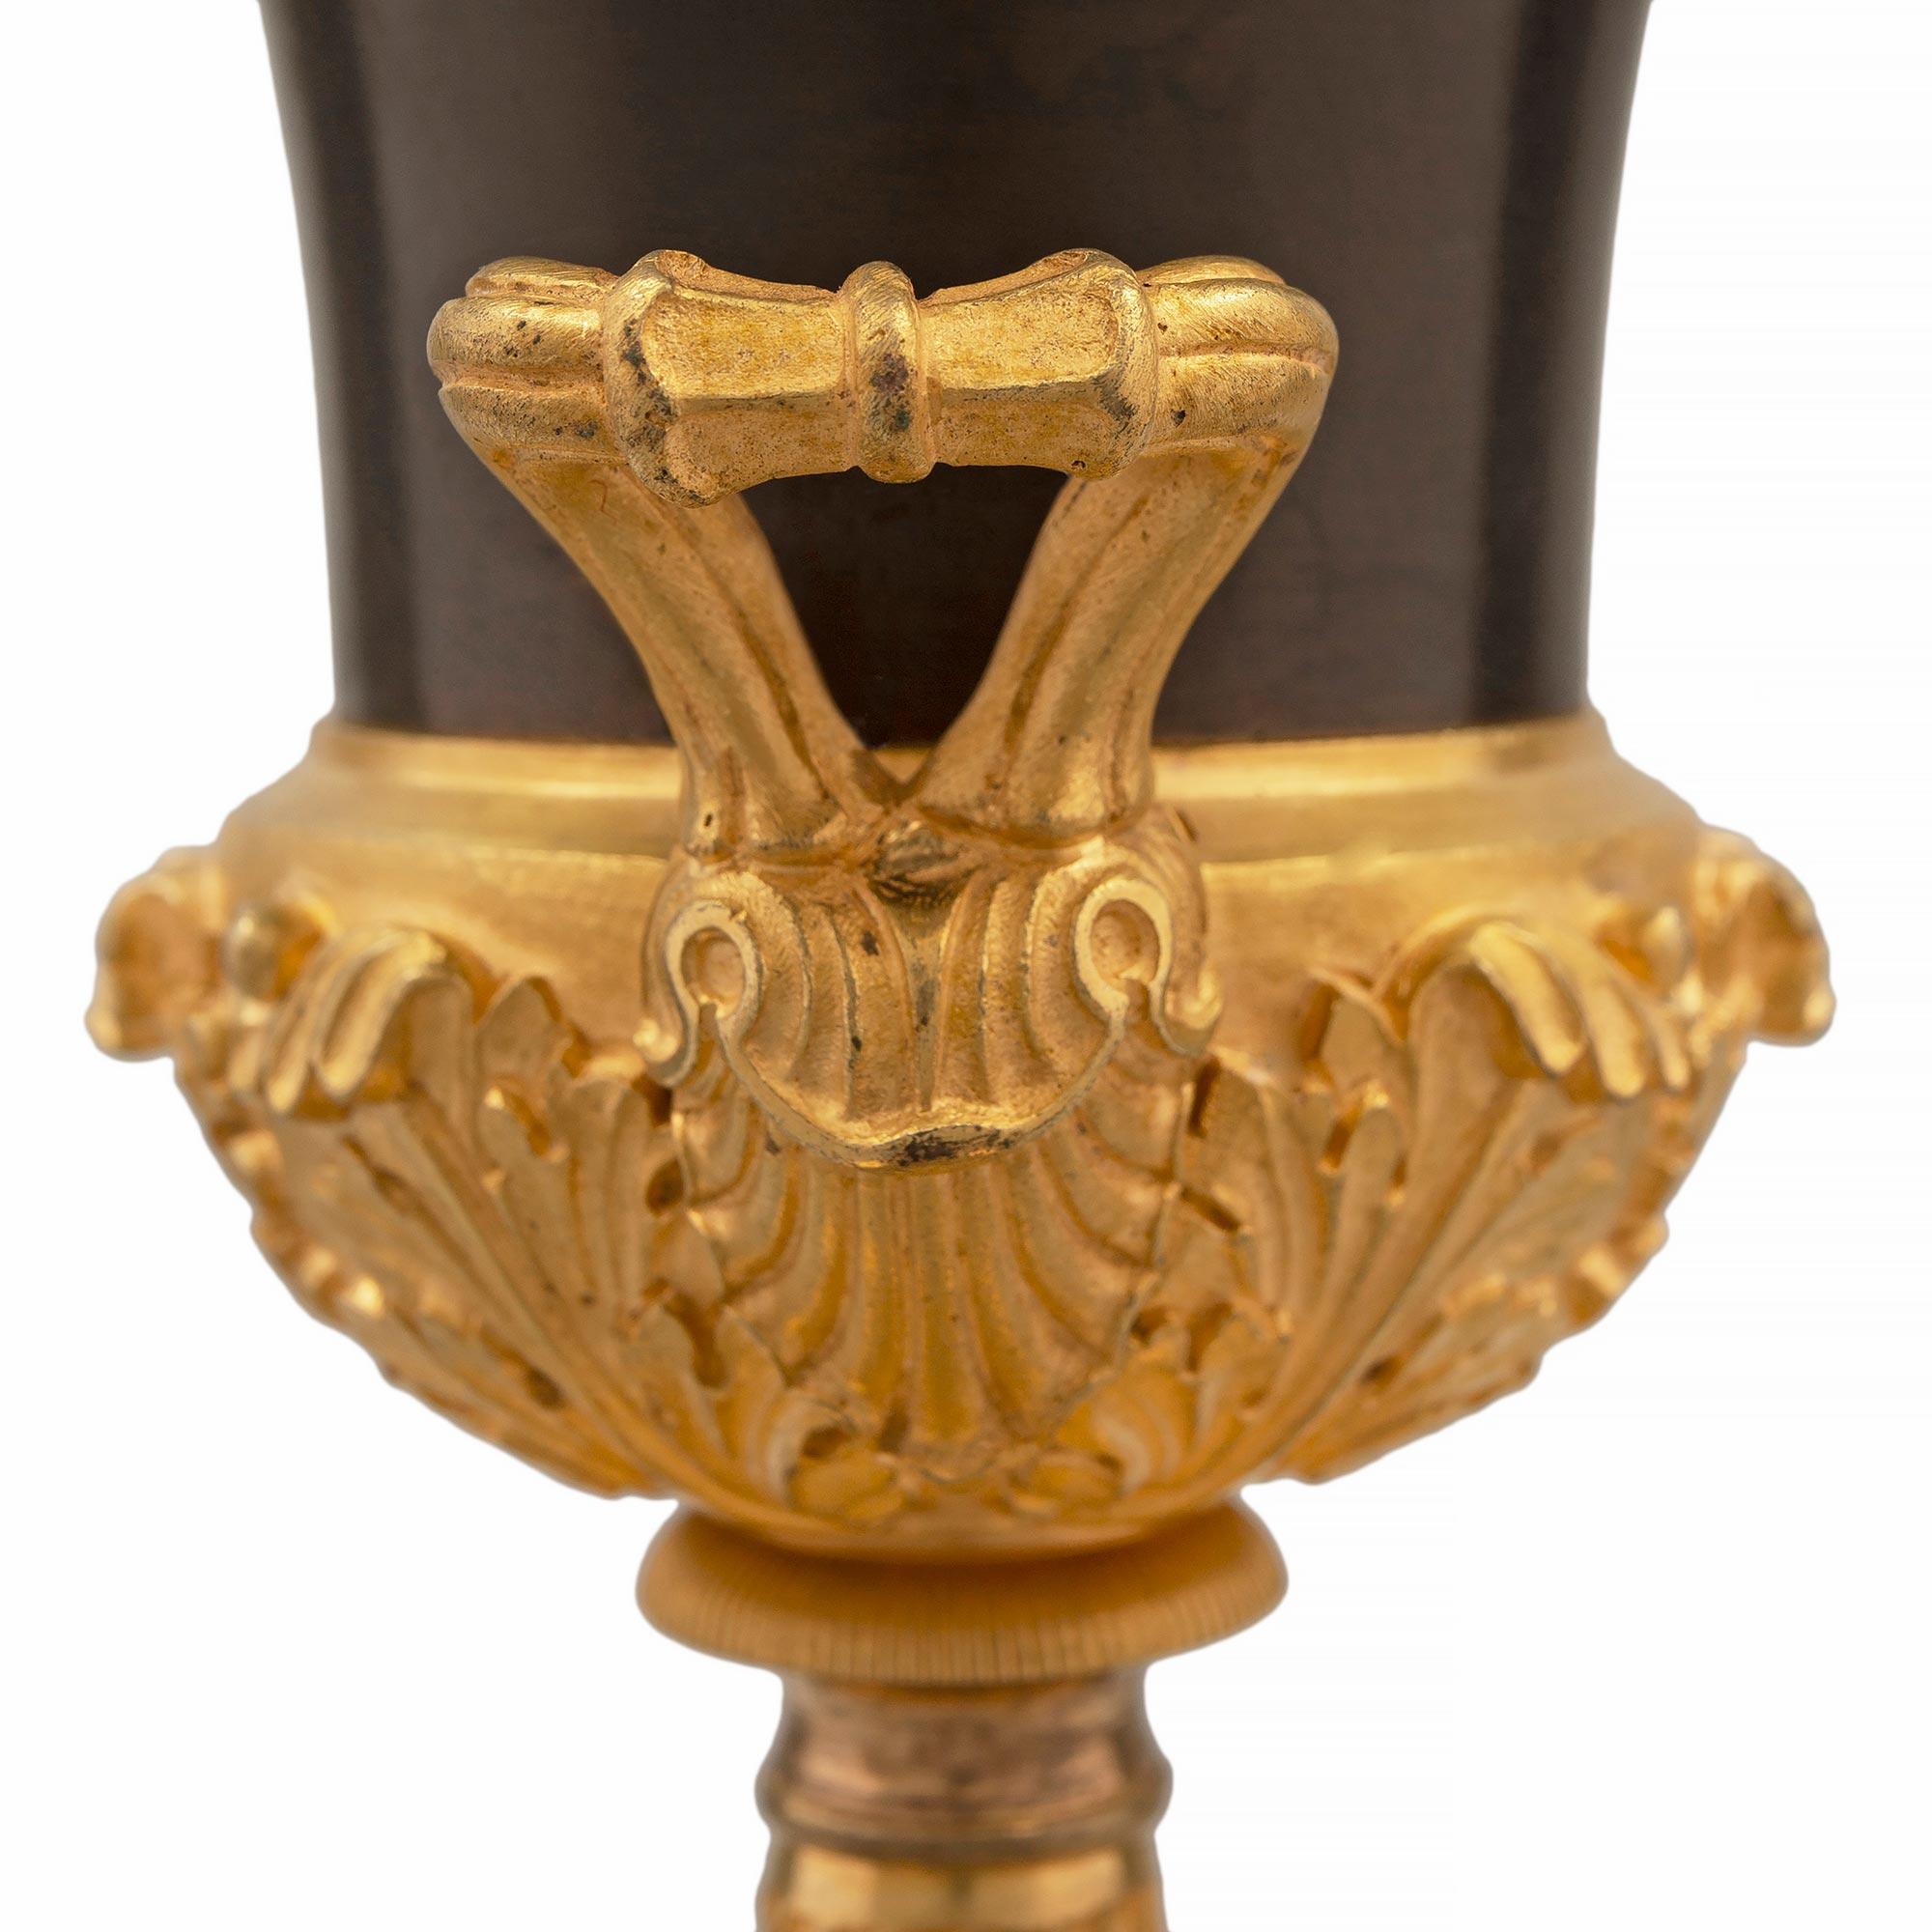 Pair of French Mid-19th Century Patinated Bronze & Ormolu Neoclassical St. Urns For Sale 4